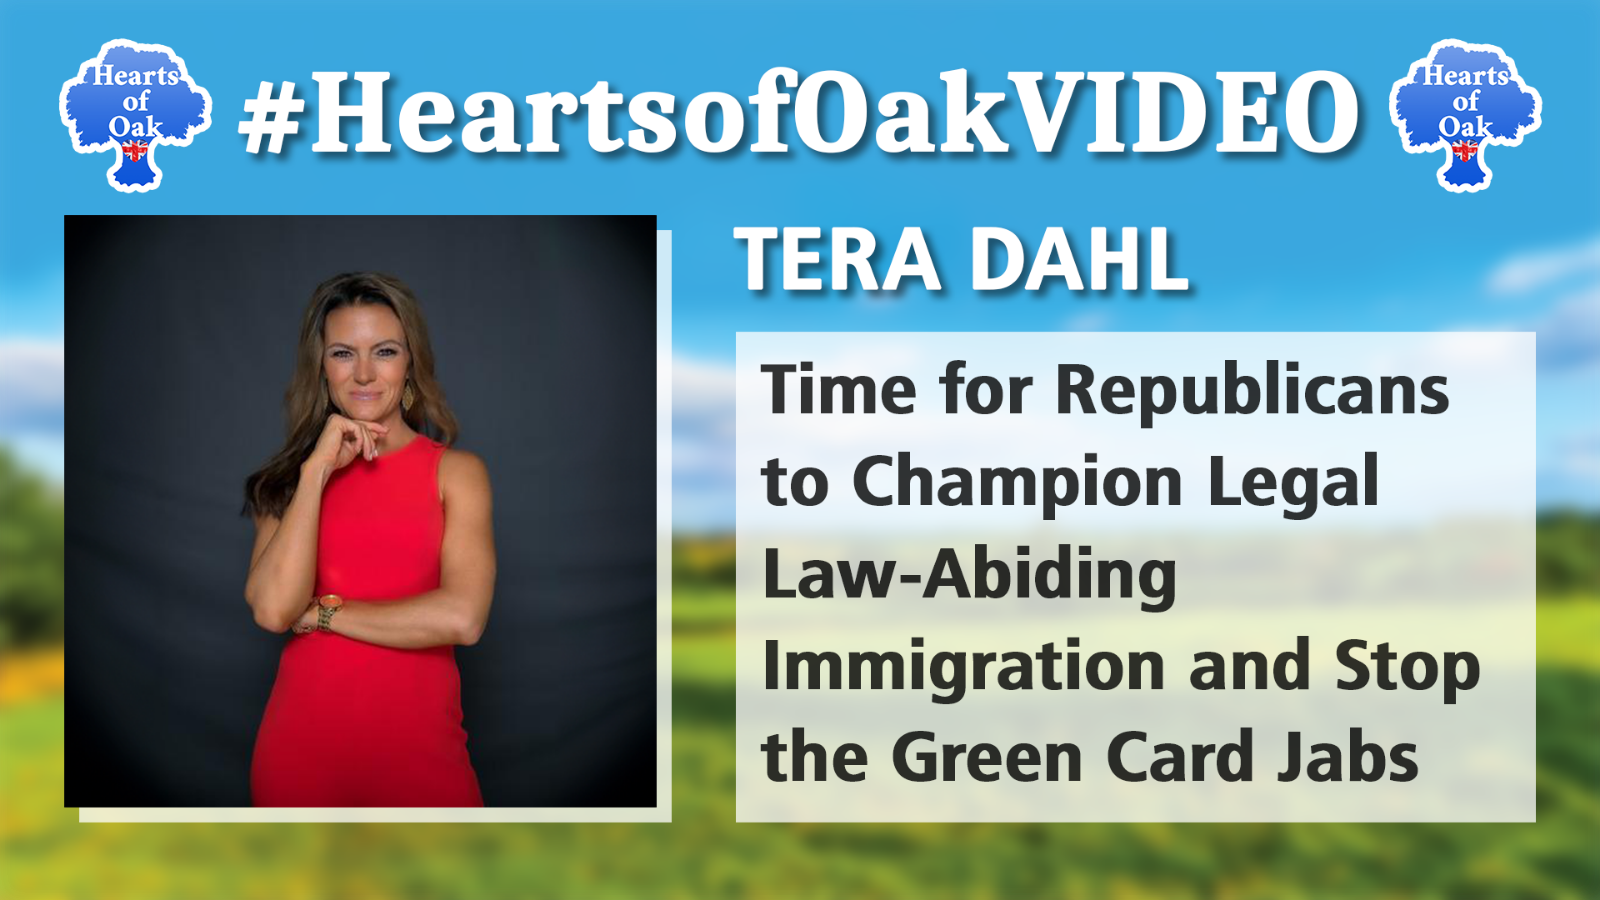 Tera Dahl - Time for Republicans to Champion Legal Law-Abiding Immigration & Stop Green Card Jabs